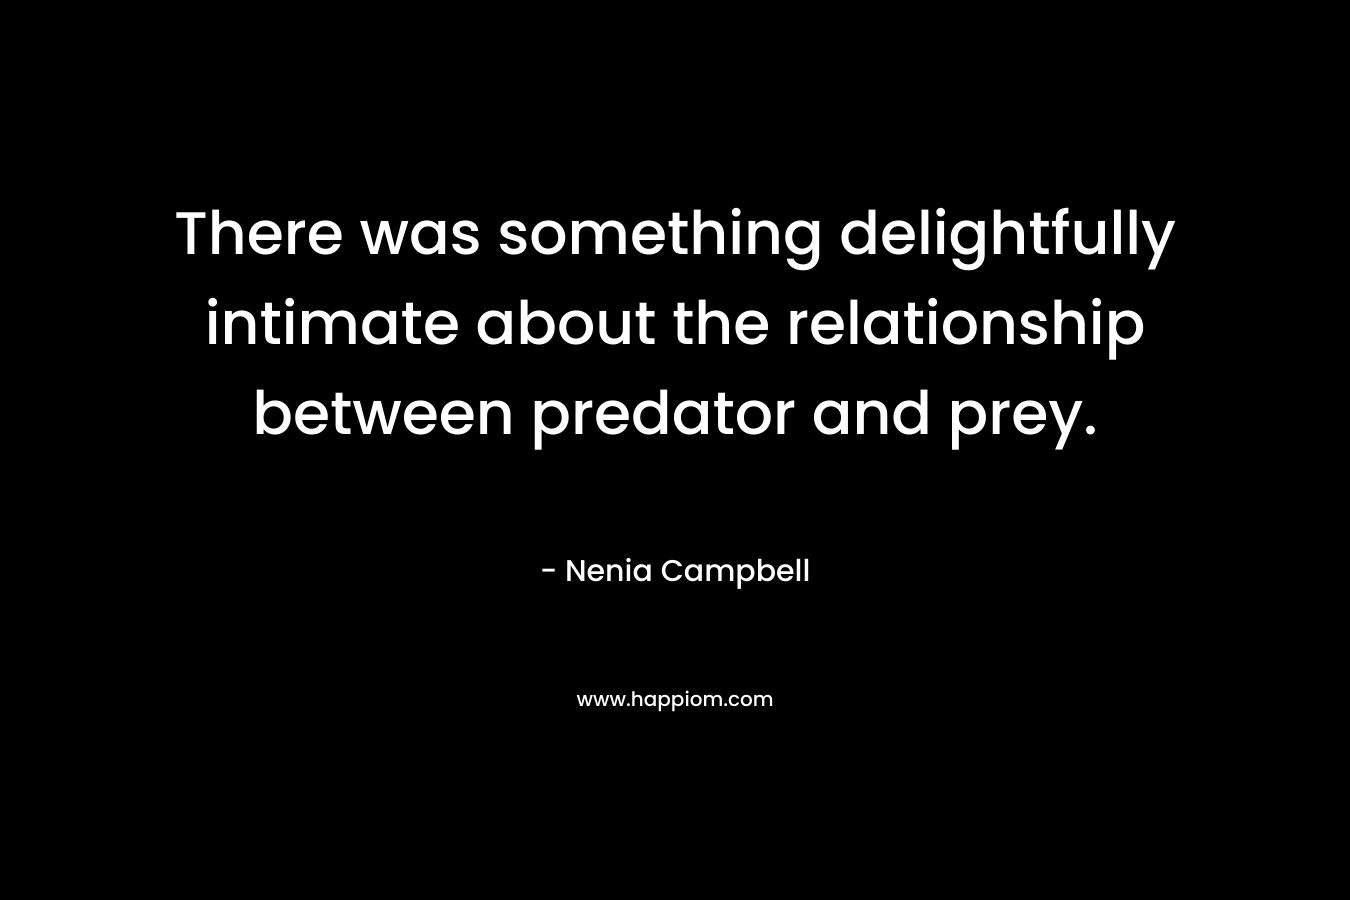 There was something delightfully intimate about the relationship between predator and prey. – Nenia Campbell